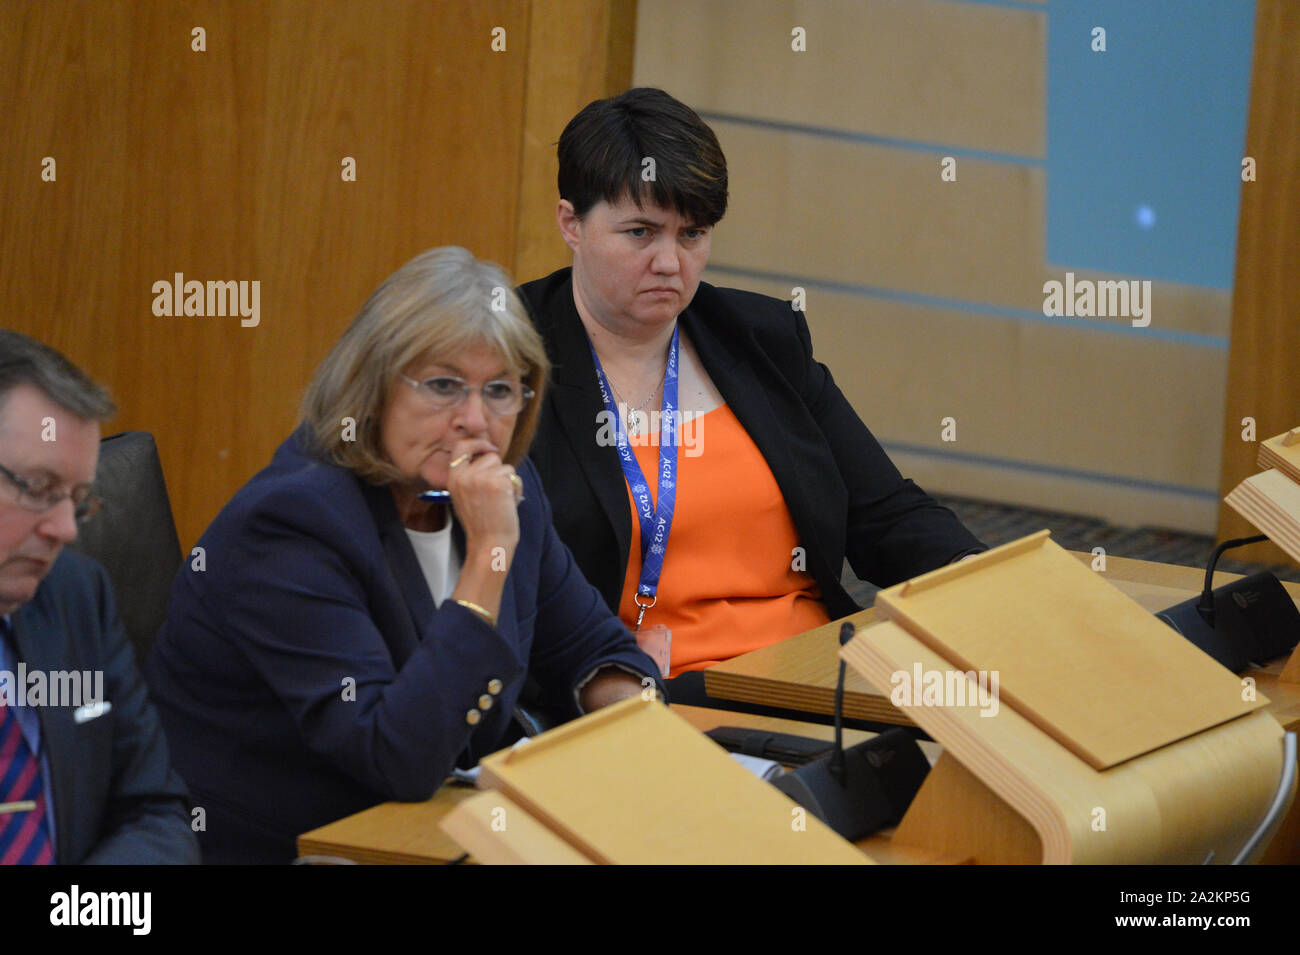 Edinburgh, UK. 03rd Oct, 2019. Edinburgh, 3 October 2019. Pictured: Ruth Davidson MSP - Former Conservative Party Leader at the Scottish Parliament during the weekly session of First Ministers Questions. Credit: Colin Fisher/Alamy Live News Stock Photo